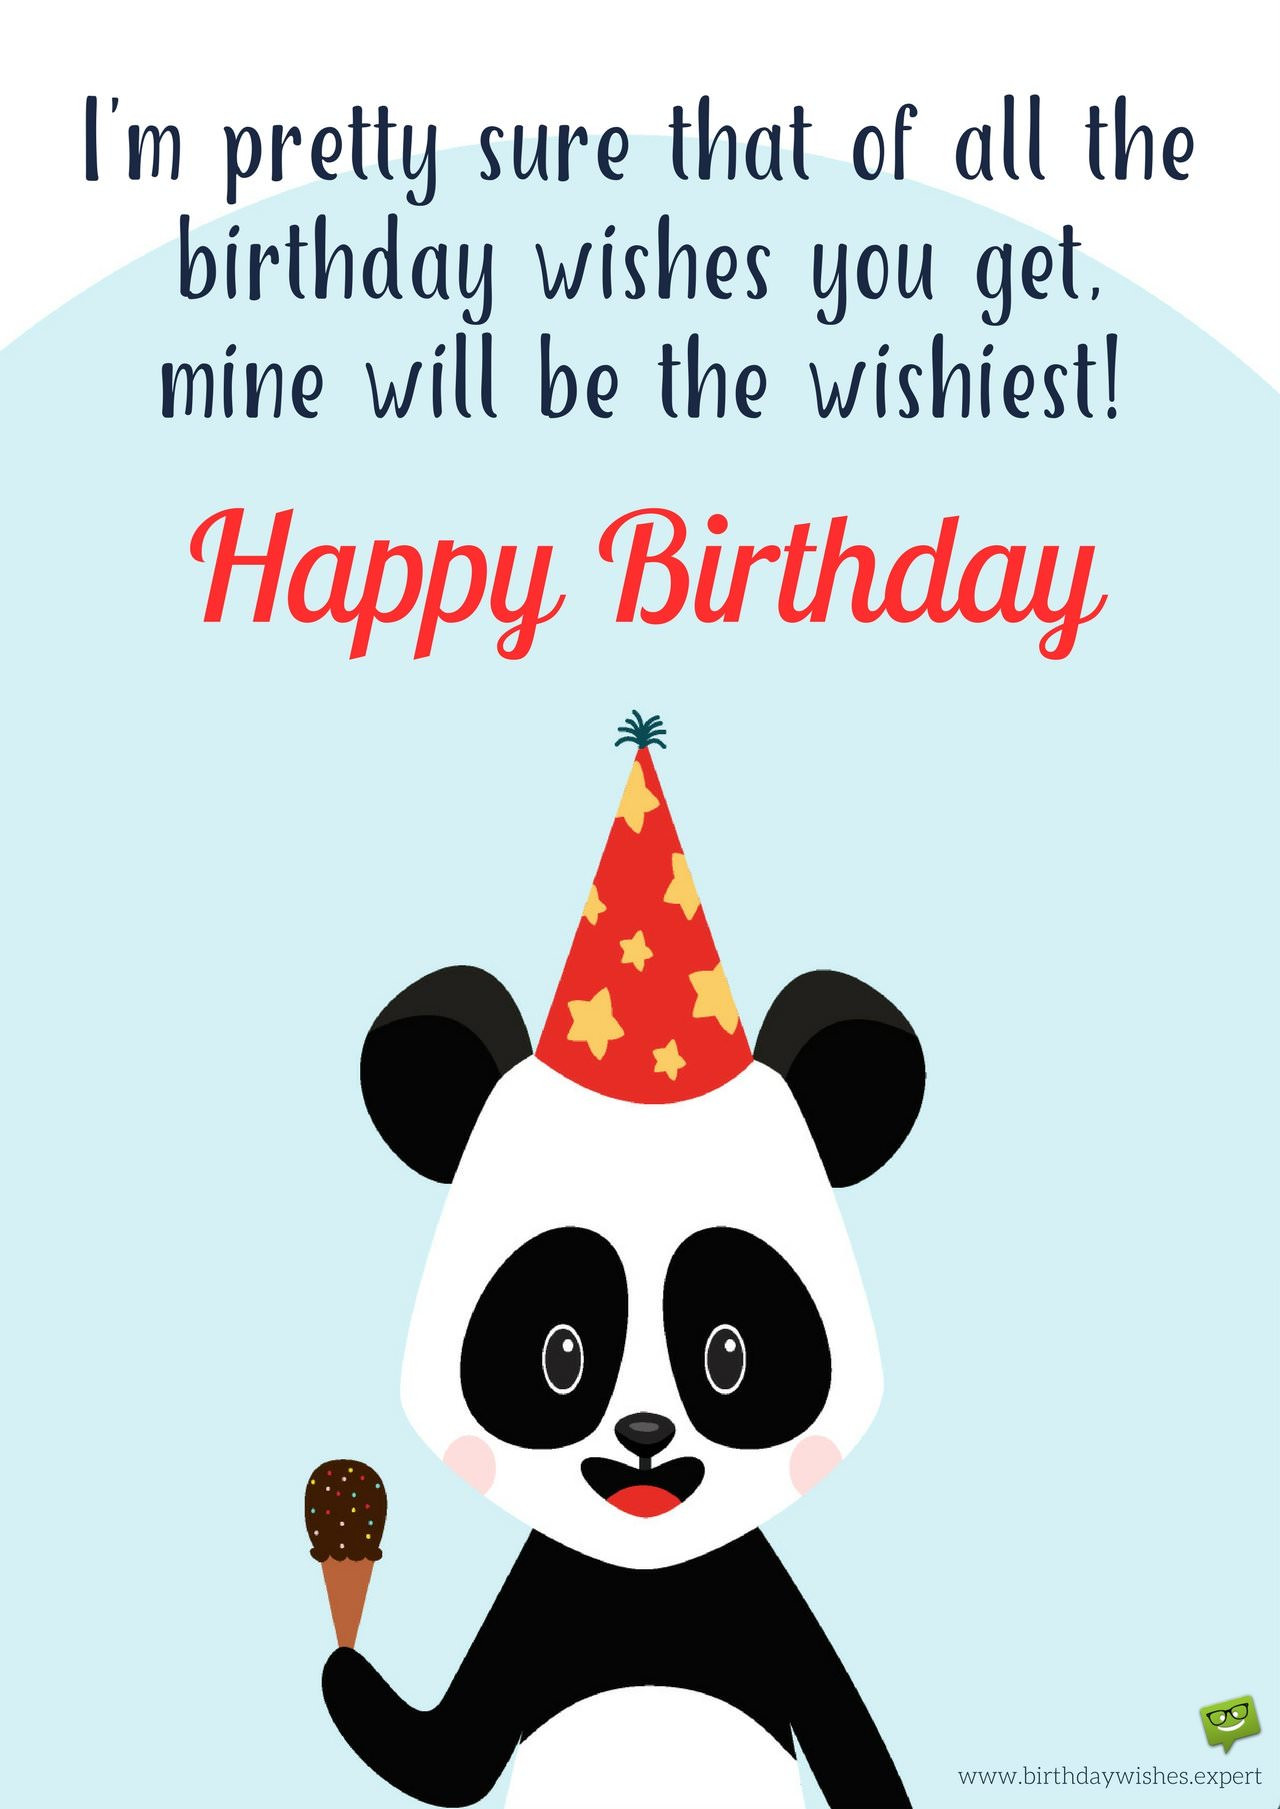 Funny Happy Birthday Quotes For Her
 The Funniest Wishes to Make your Wife Smile on her Birthday